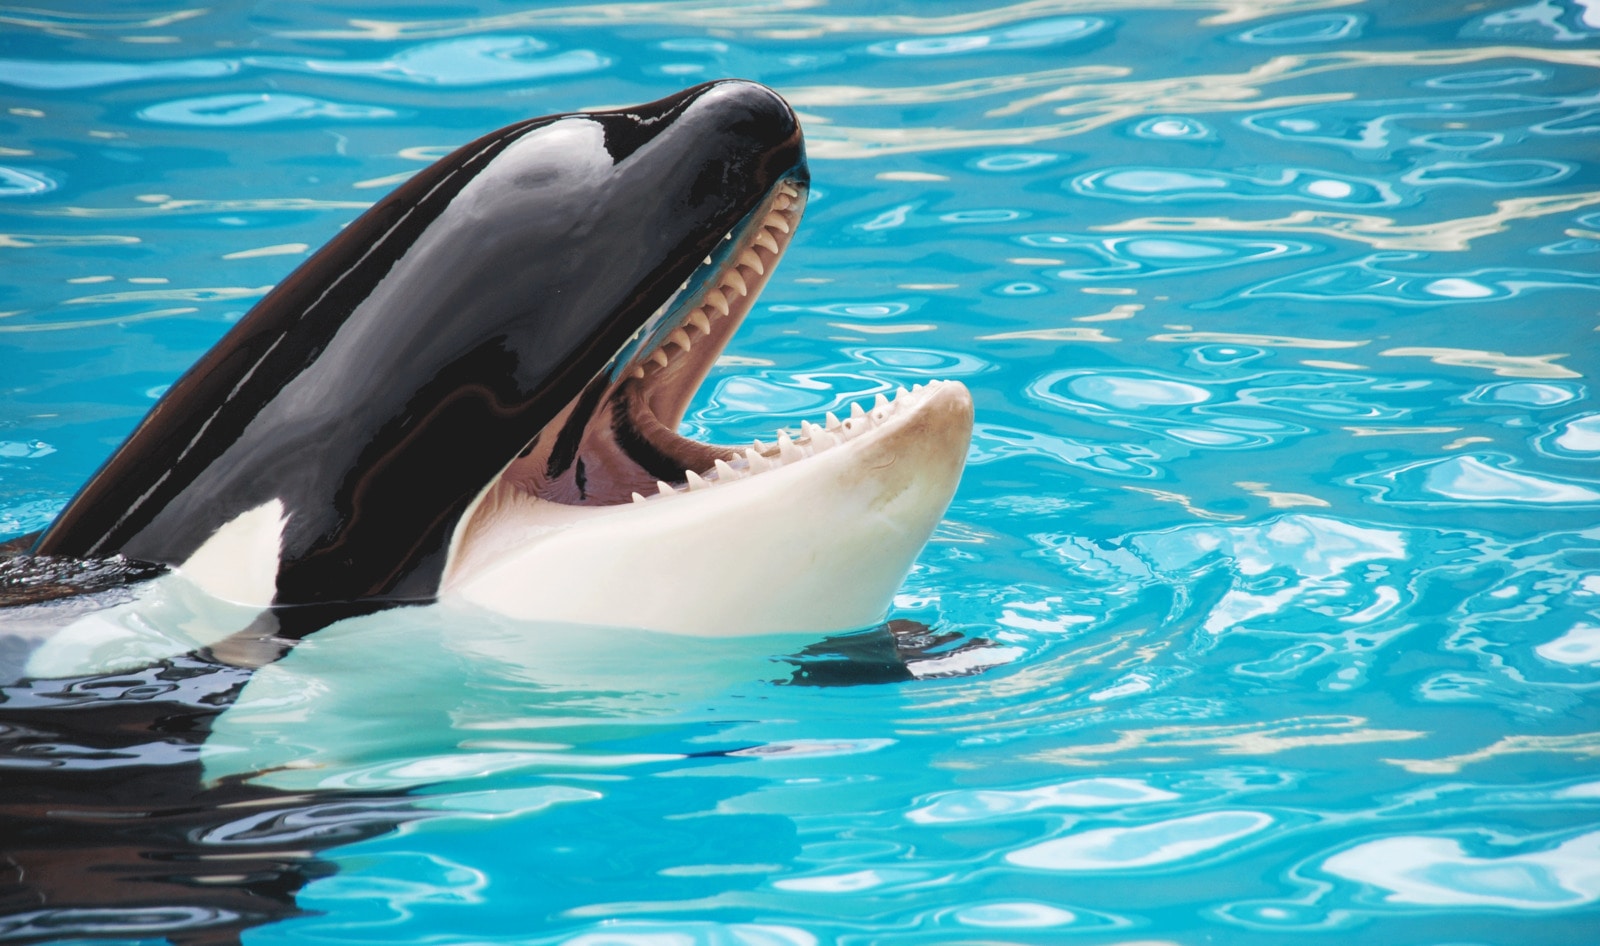 New Orca Documentary Takes an In-Depth Look at the Case Against Captivity